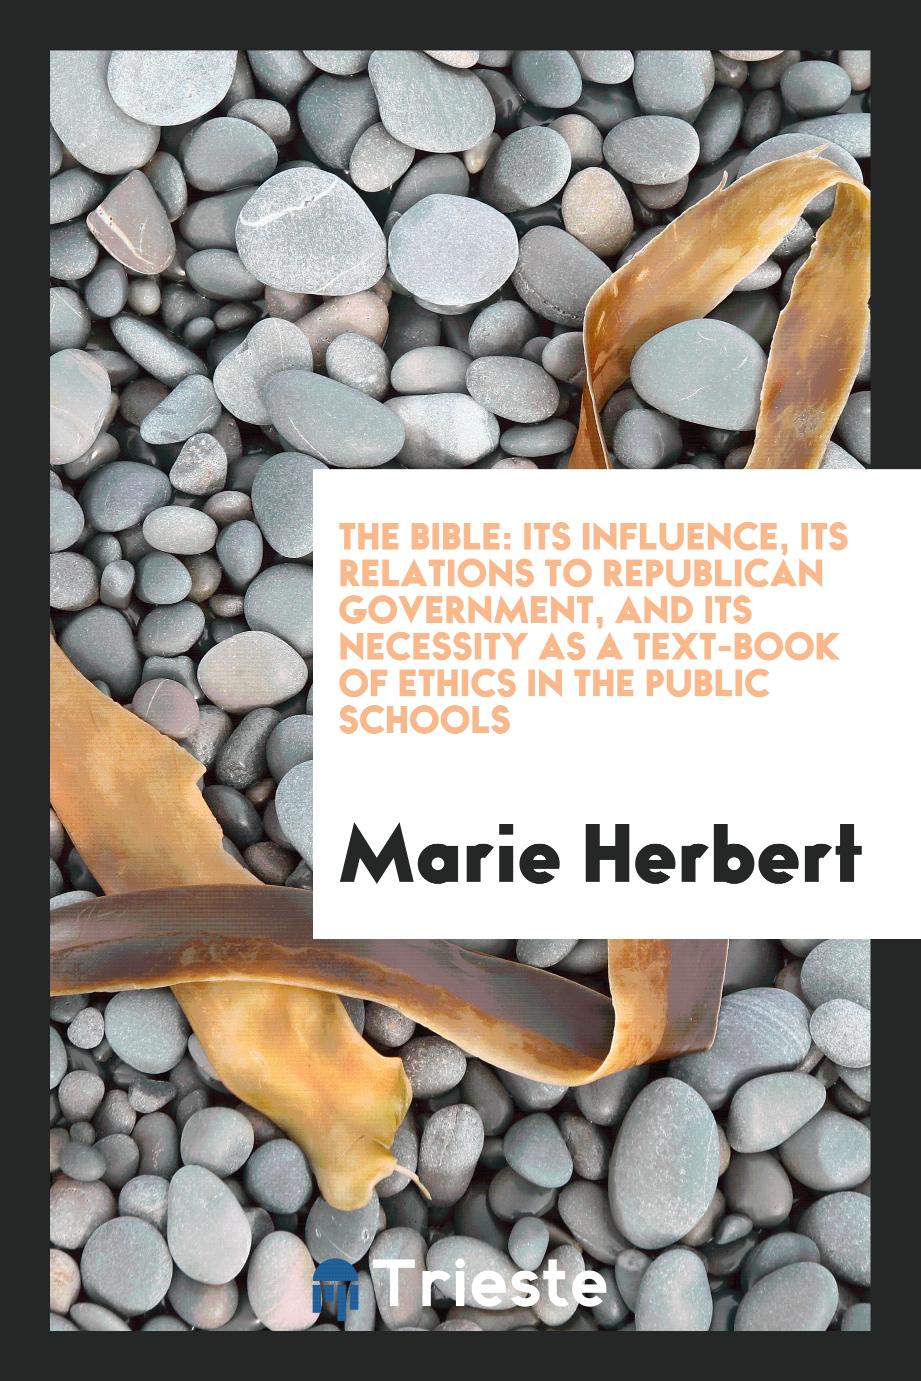 The Bible: Its Influence, Its Relations to Republican Government, and Its Necessity as a Text-Book of Ethics in the Public Schools